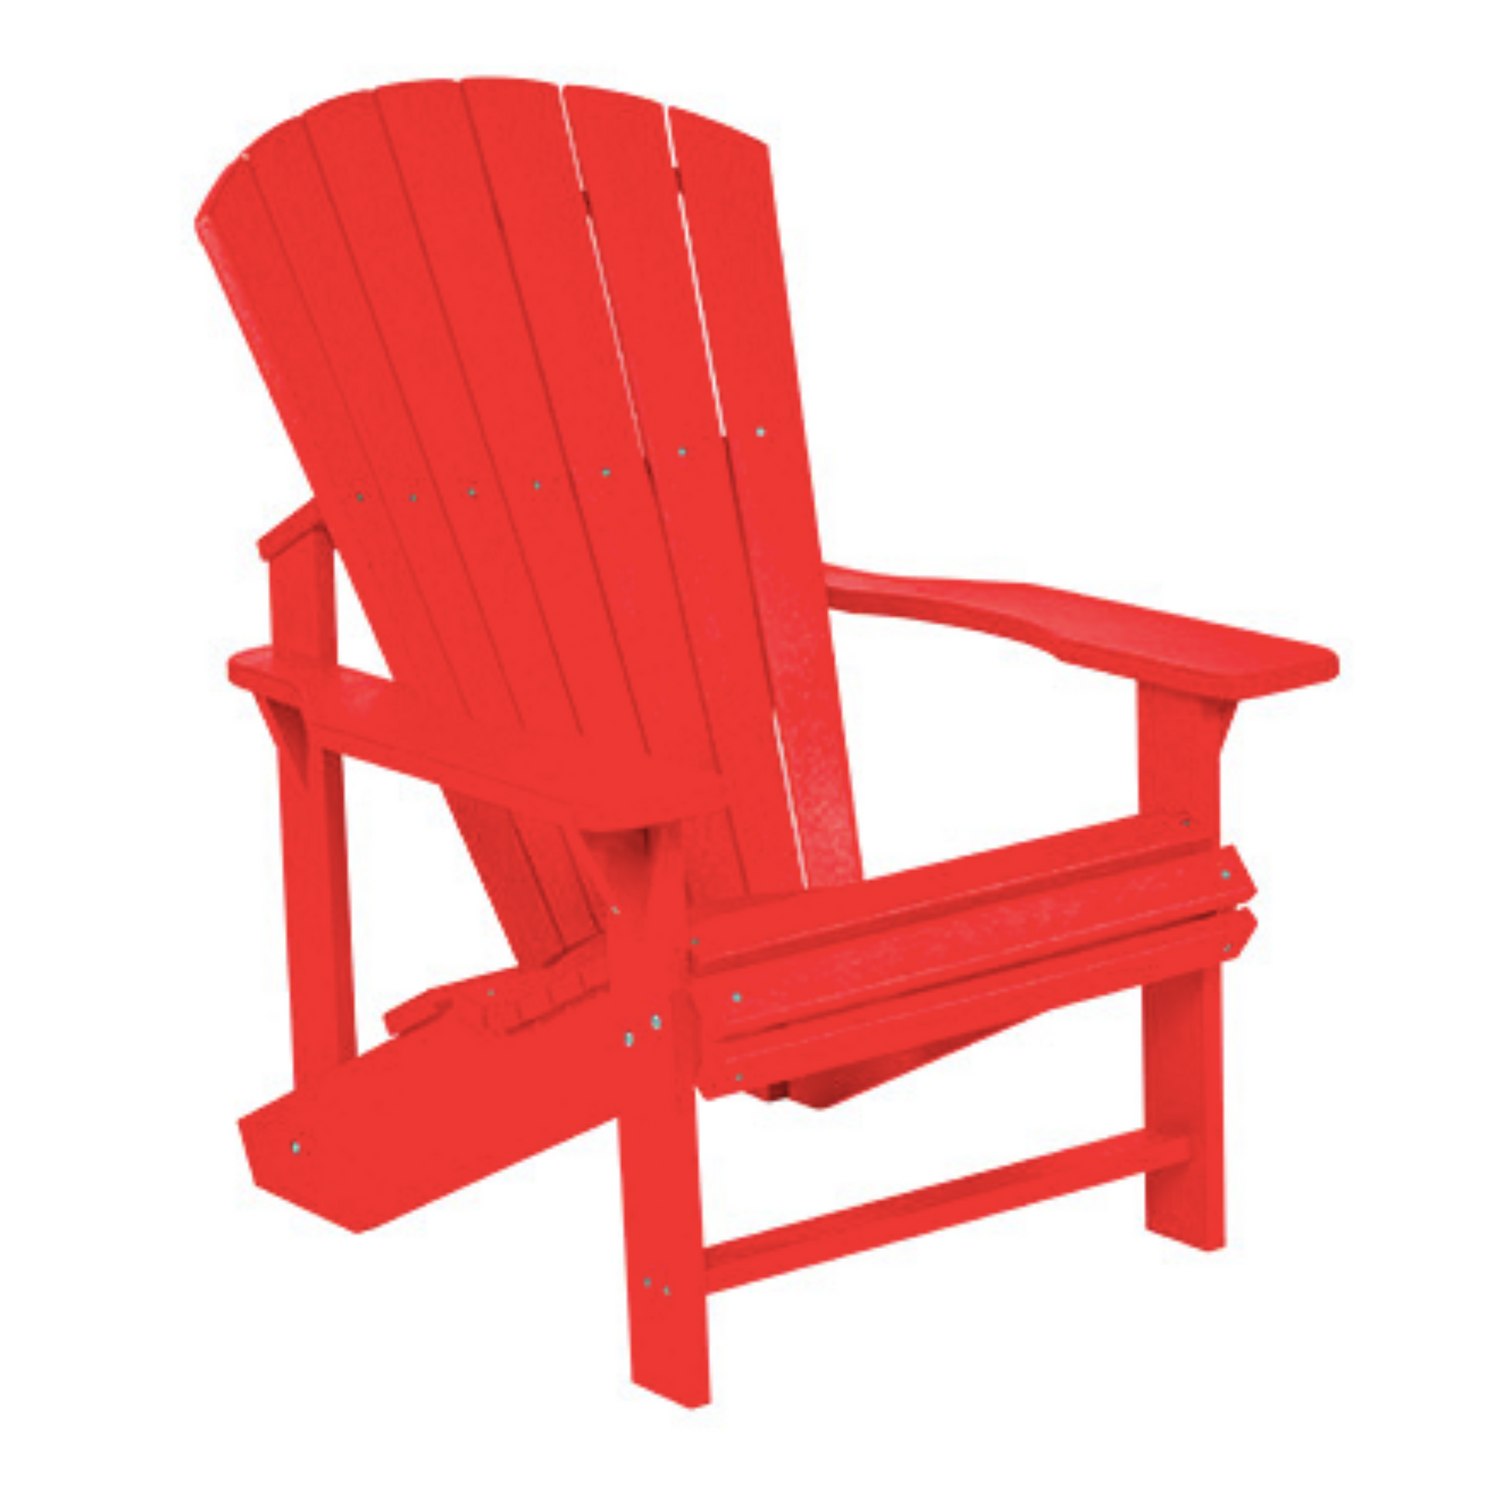 C.R.P. Upright Adirondack Chair In Red